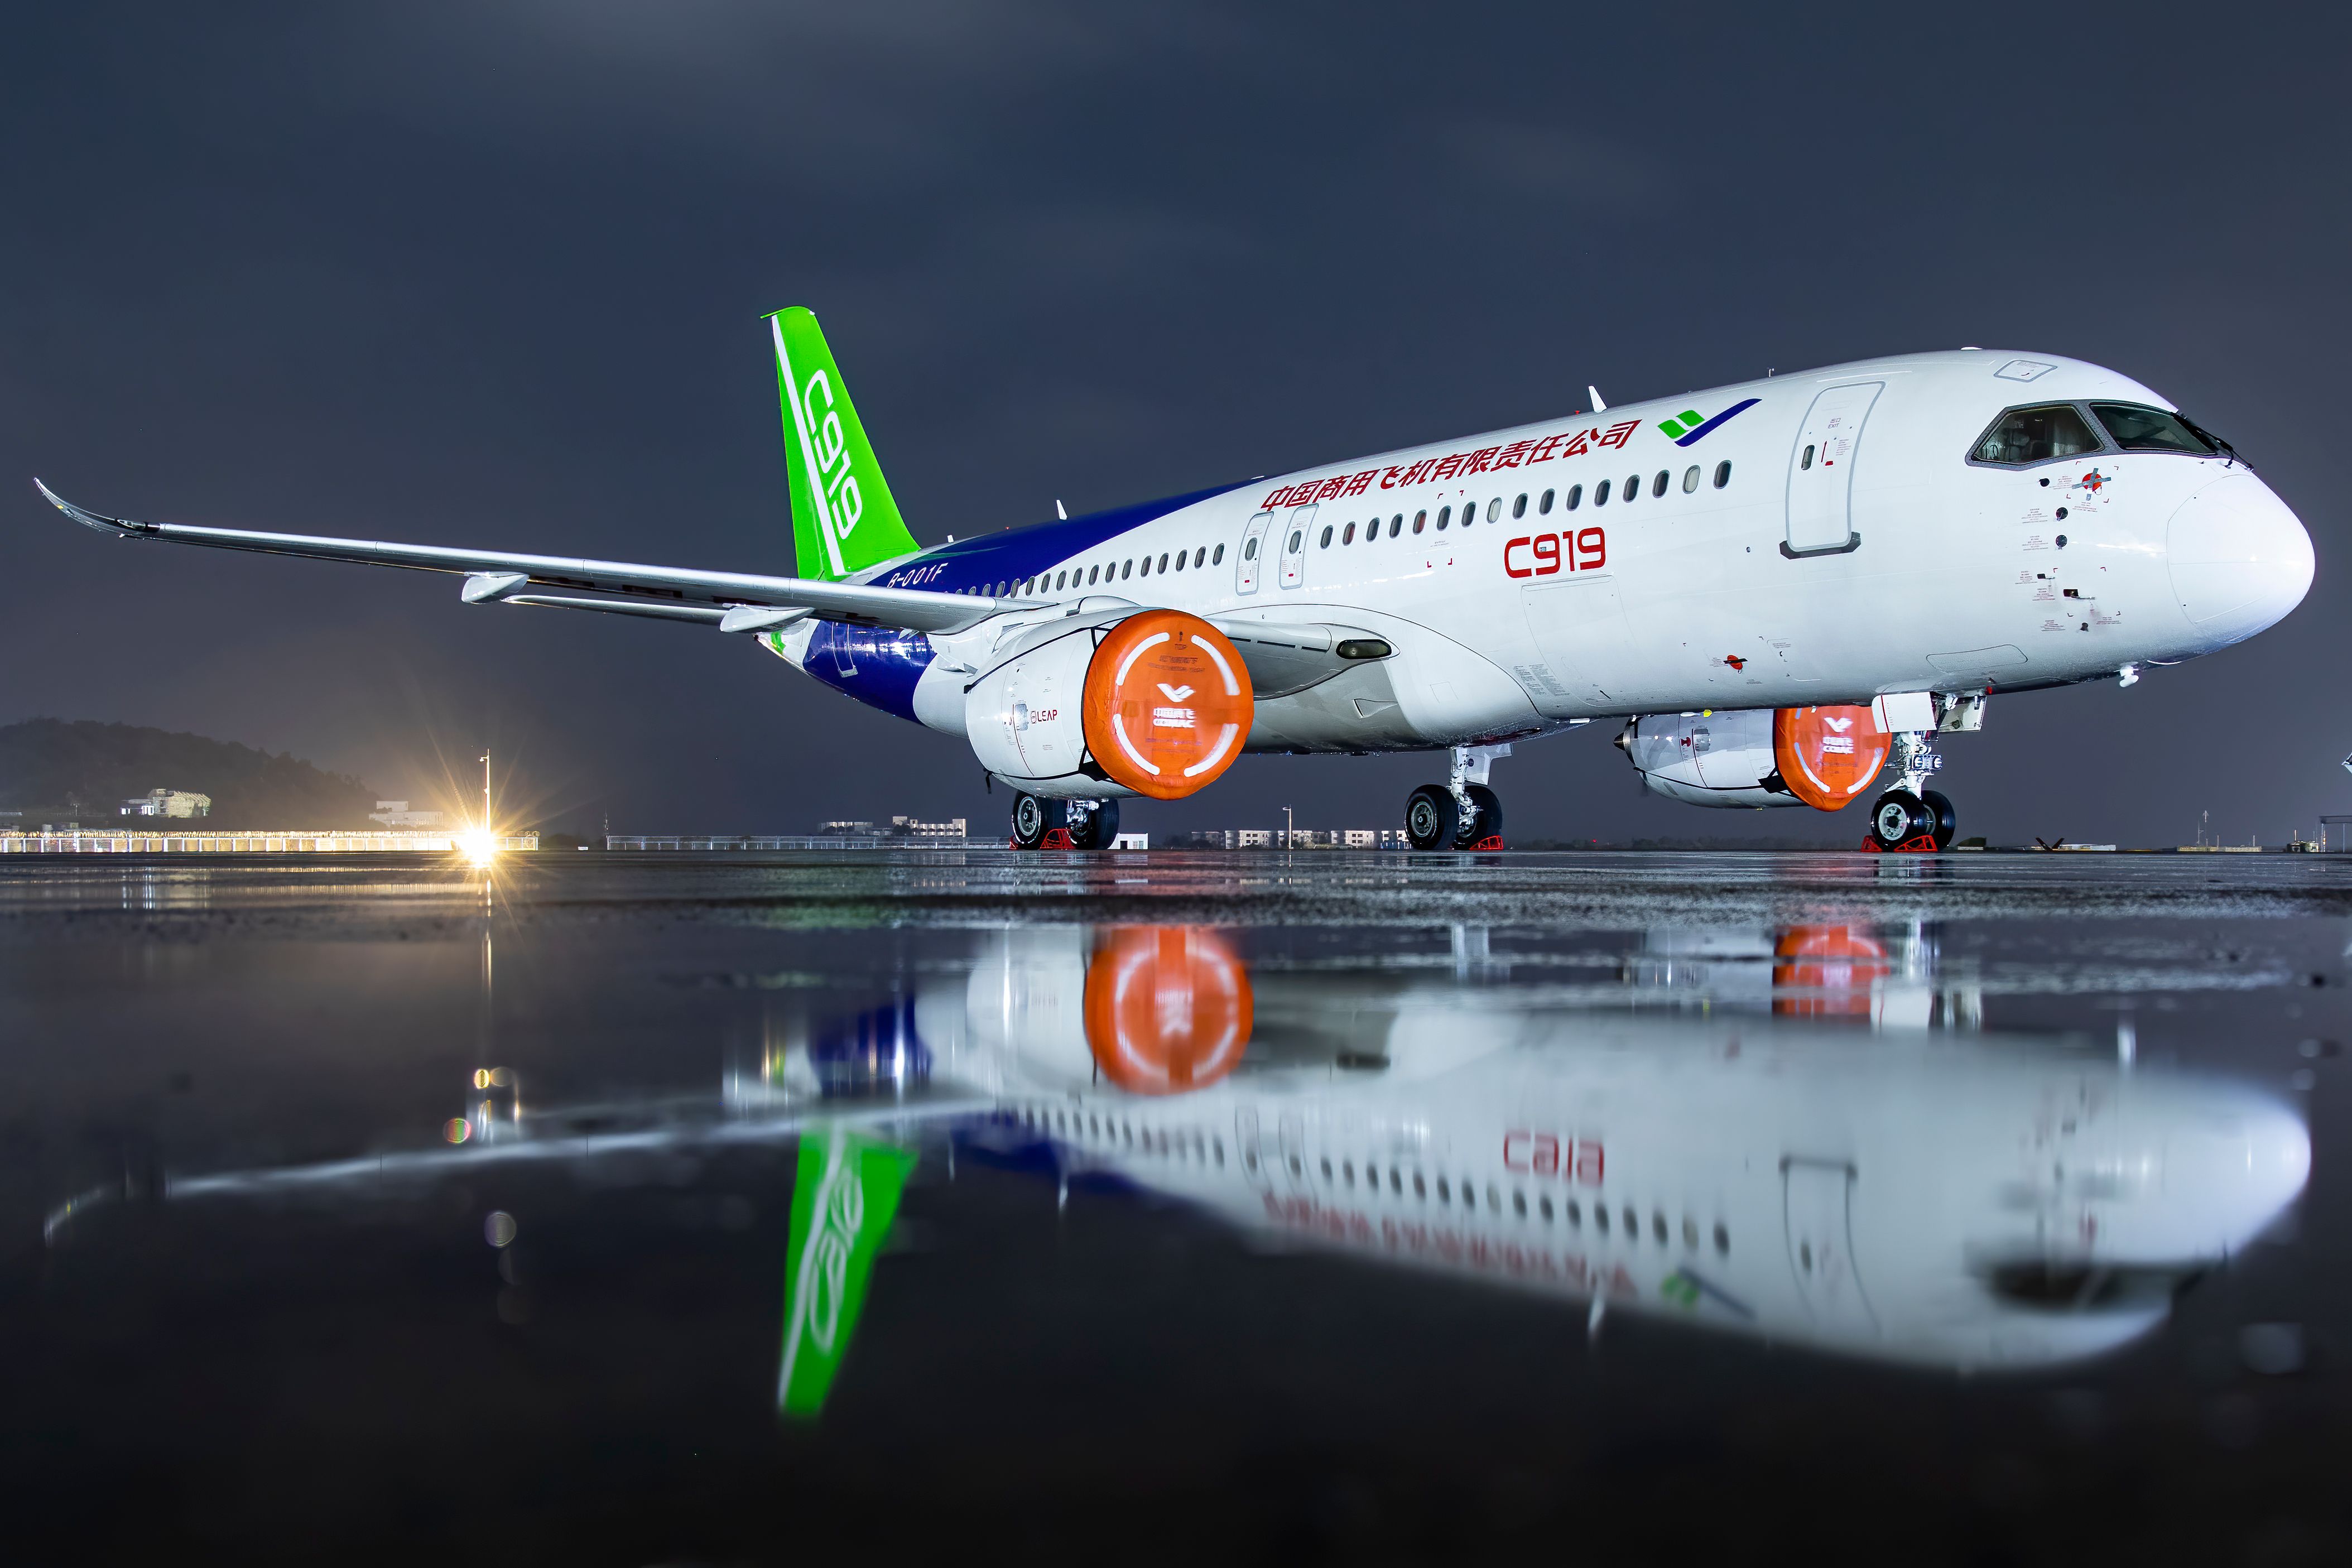 COMAC C919 aircraft on apron in the dark